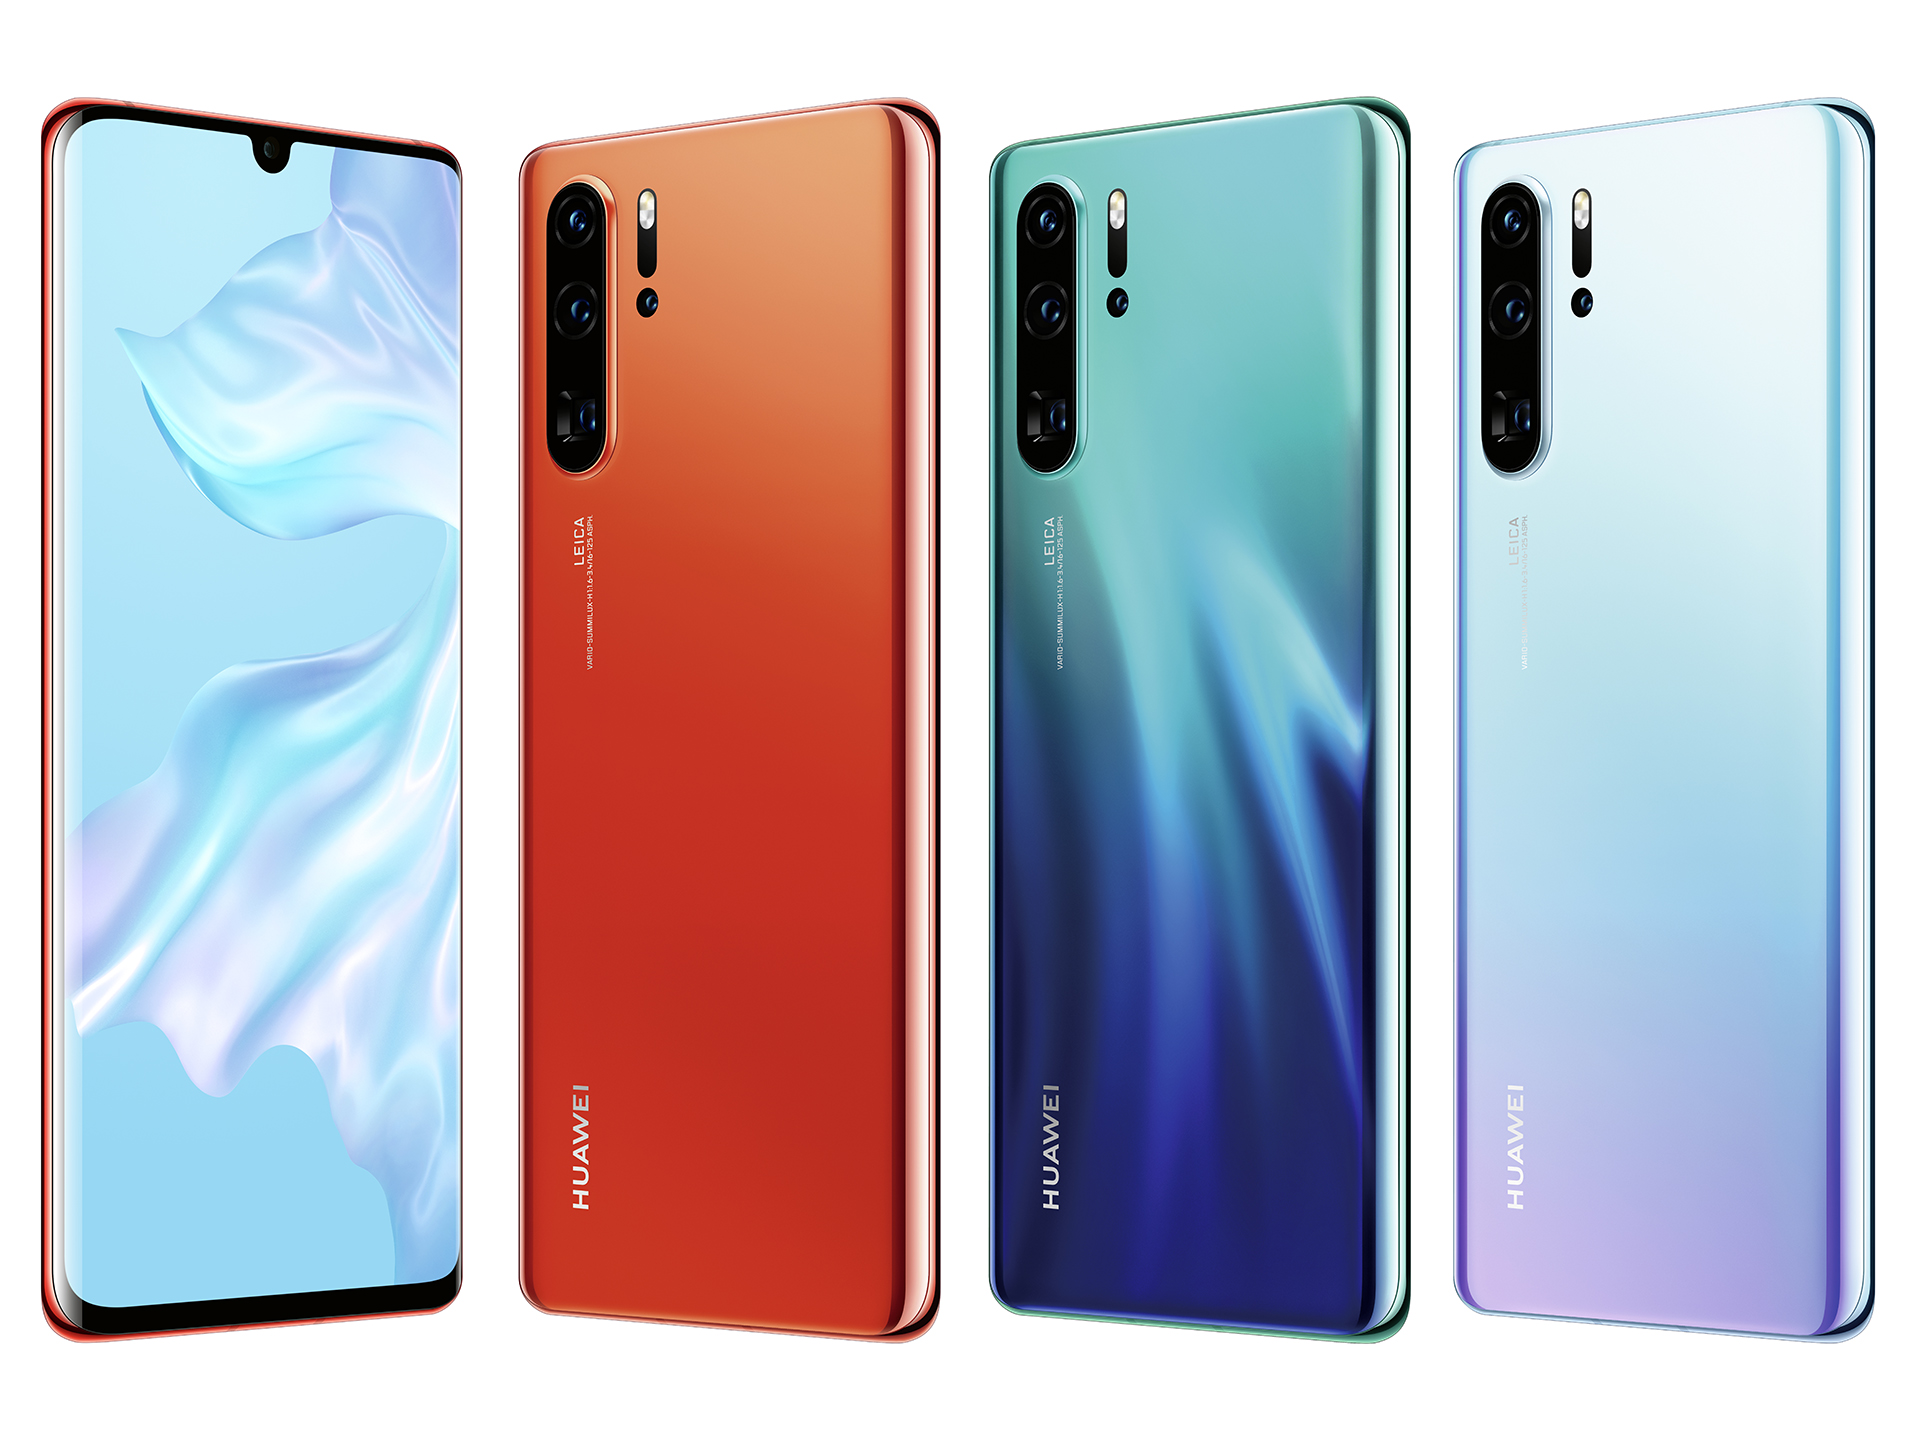 Huawei P30 Lite hands-on: it looks the part